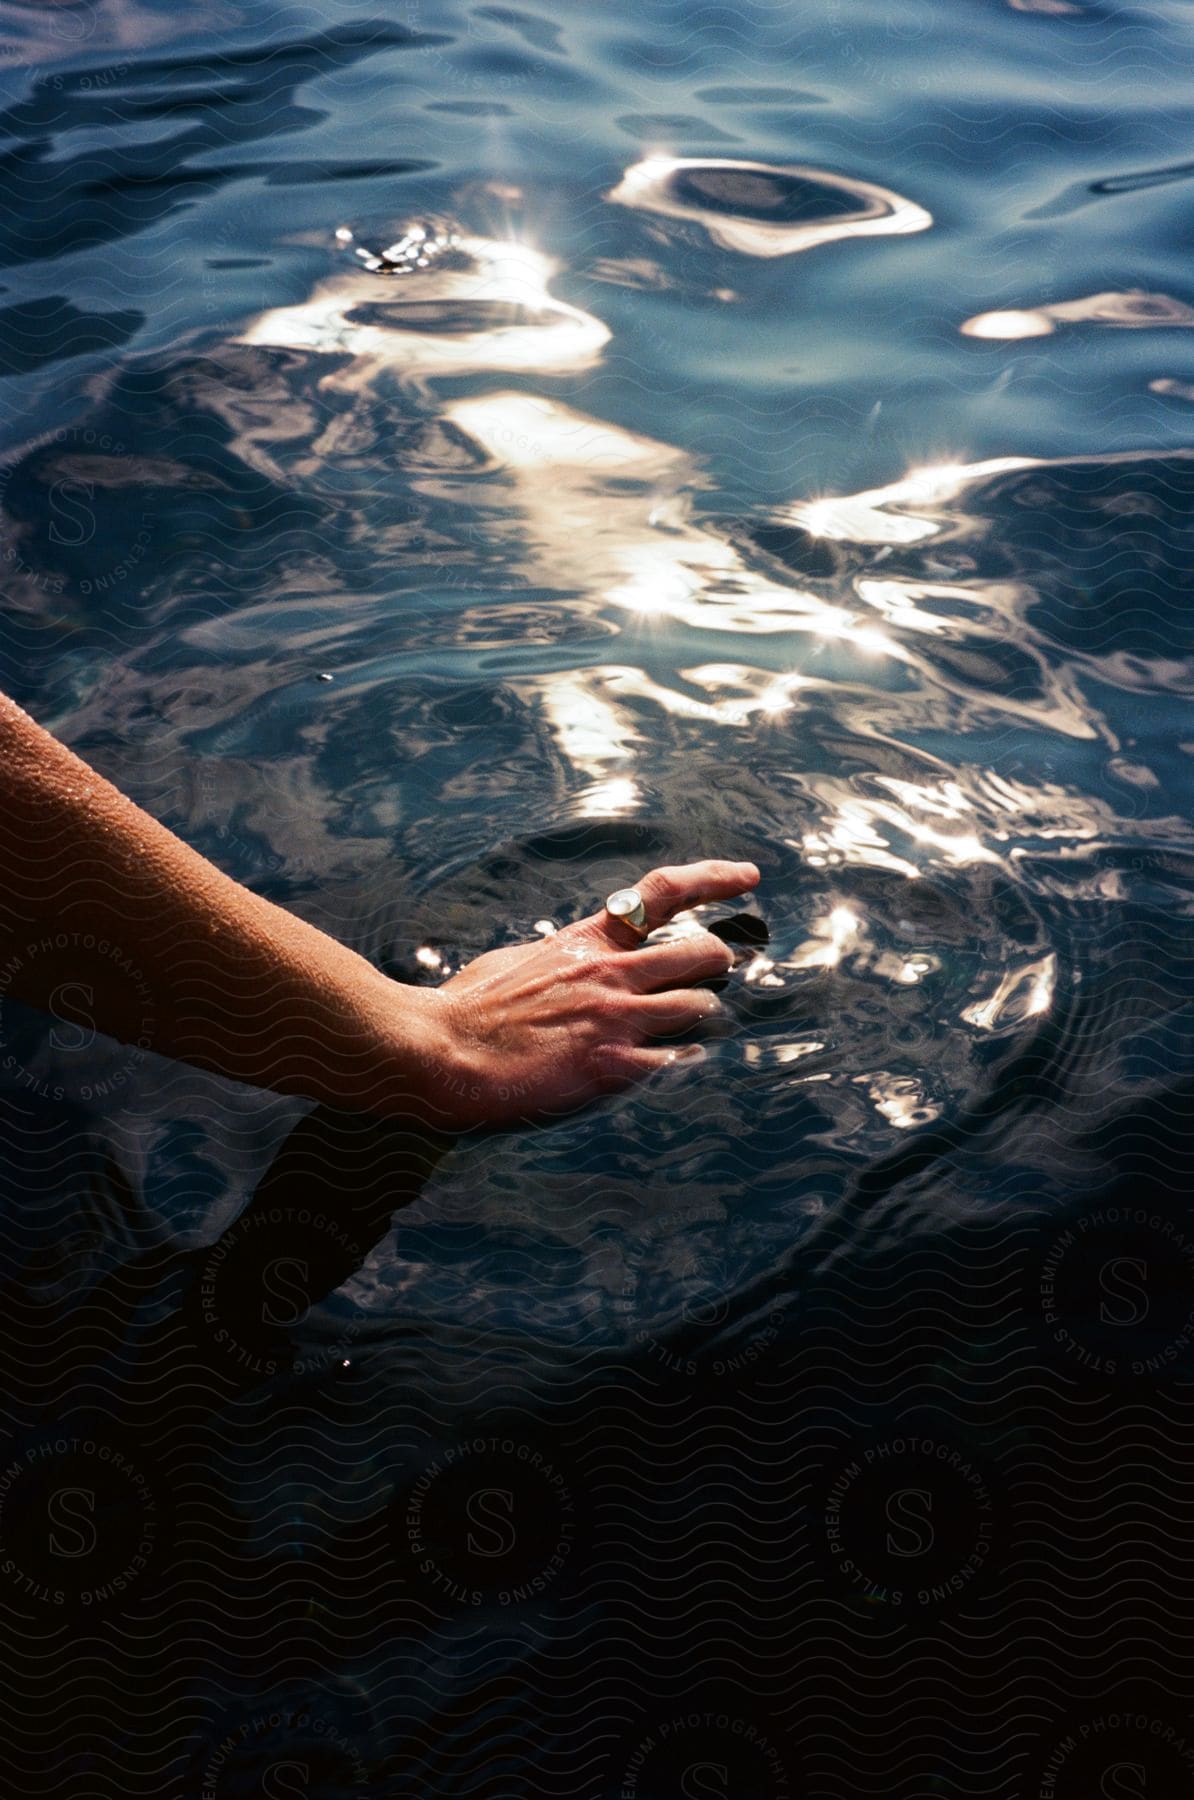 A woman's hand with a silver ring on her finger reaches into the water as sunlight reflects on the ripples and waves